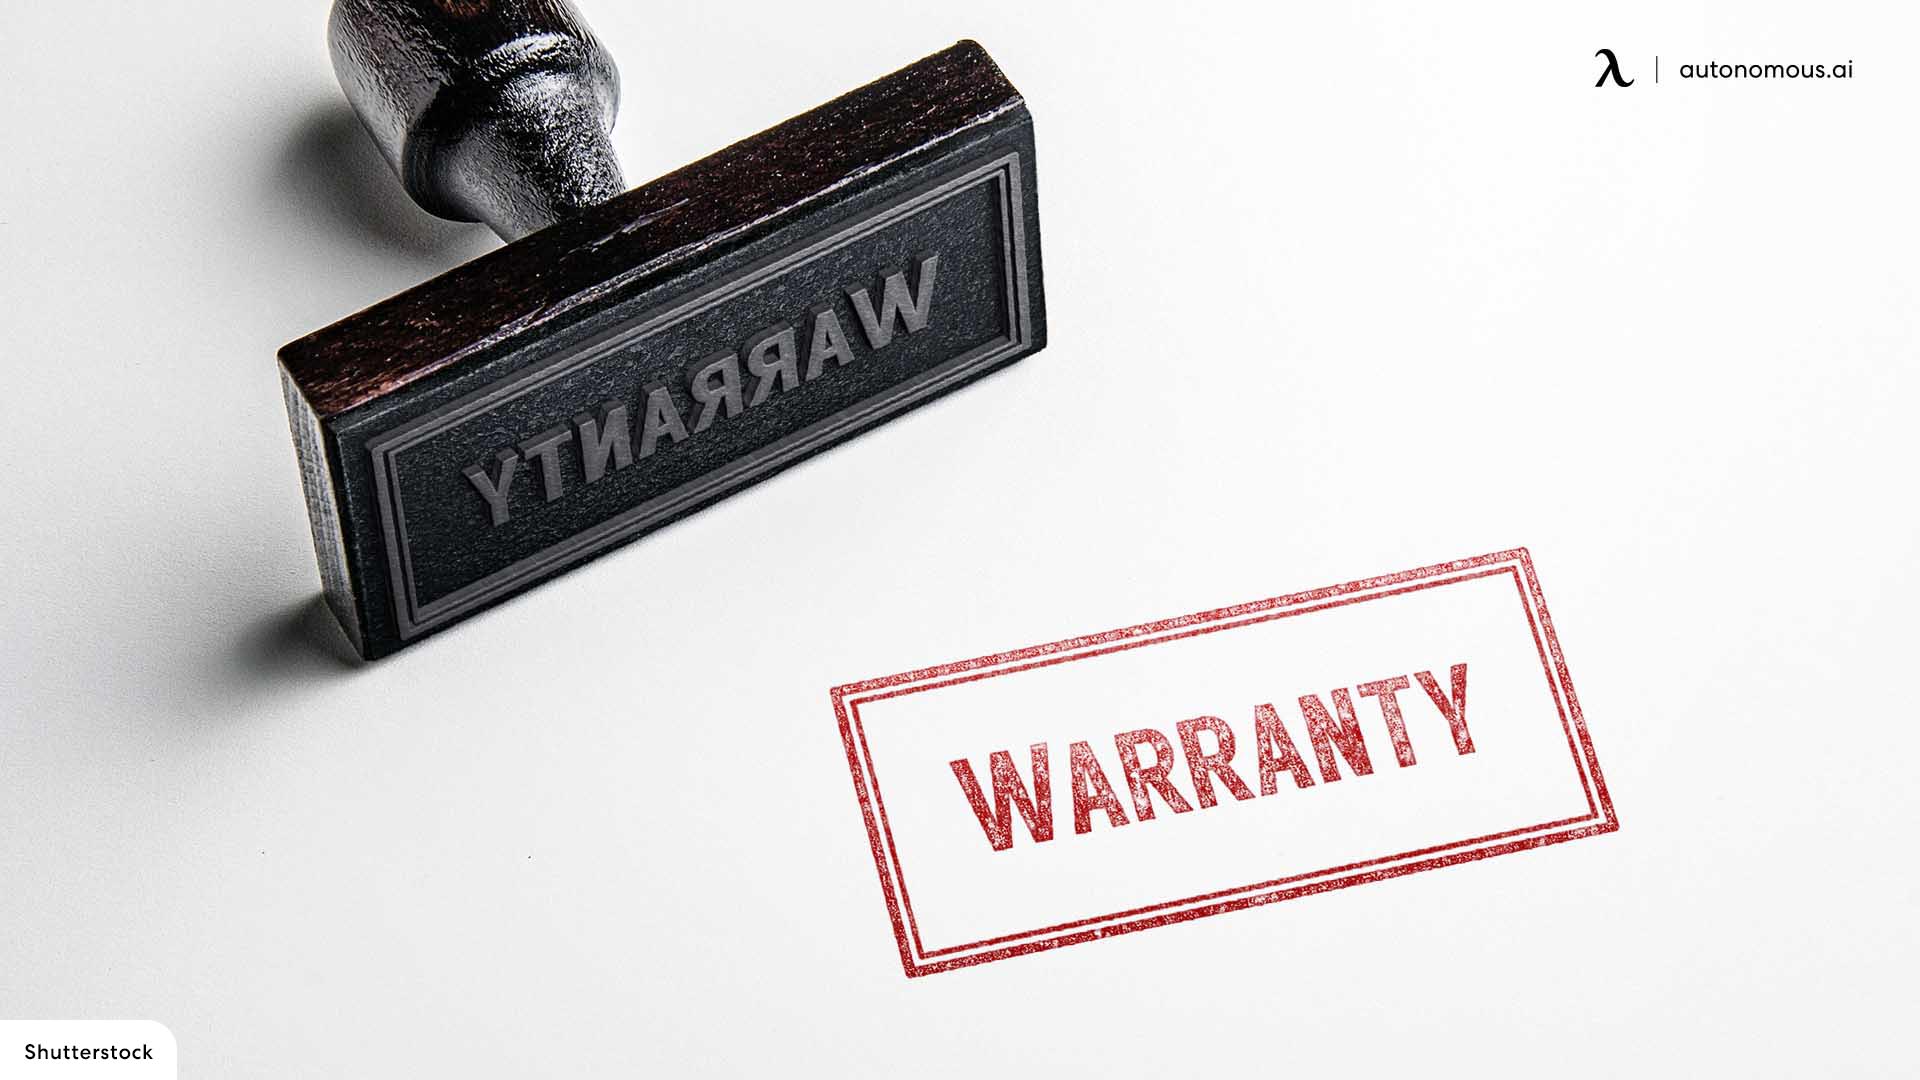 Price and Warranty in desk lamp buying guide